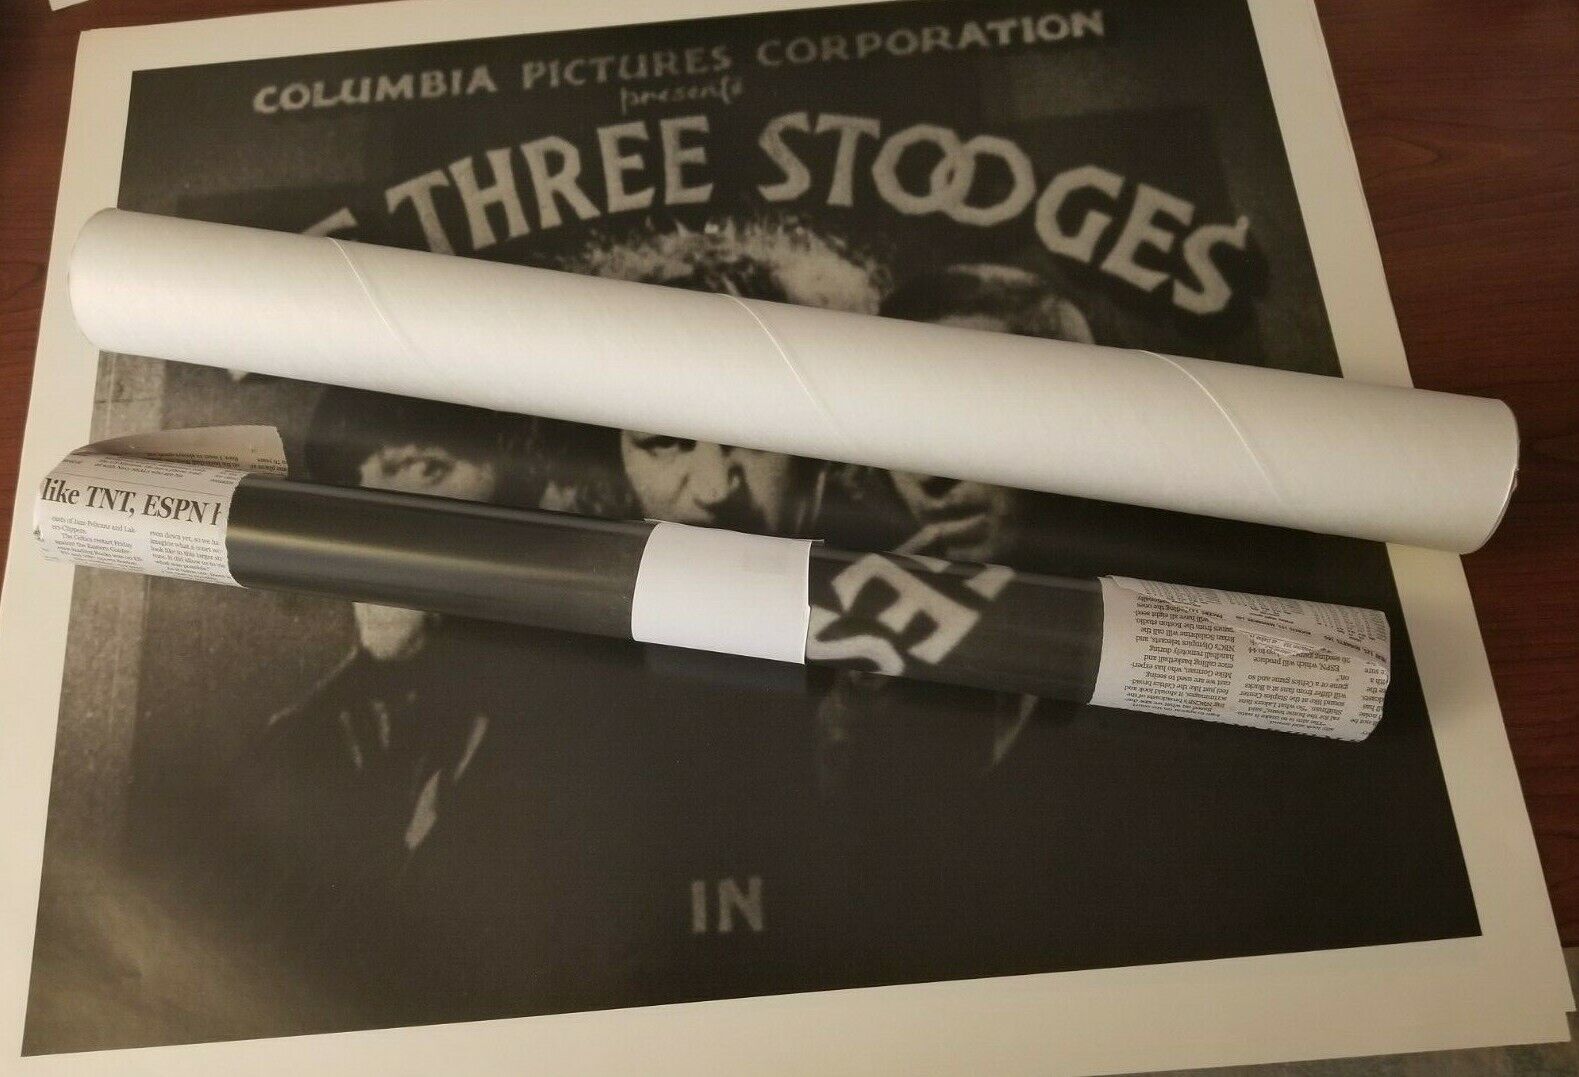 Three Stooges poster (Pack of 3) Columbia Pictures opening shot (Mark's comics) Без бренда - фотография #3